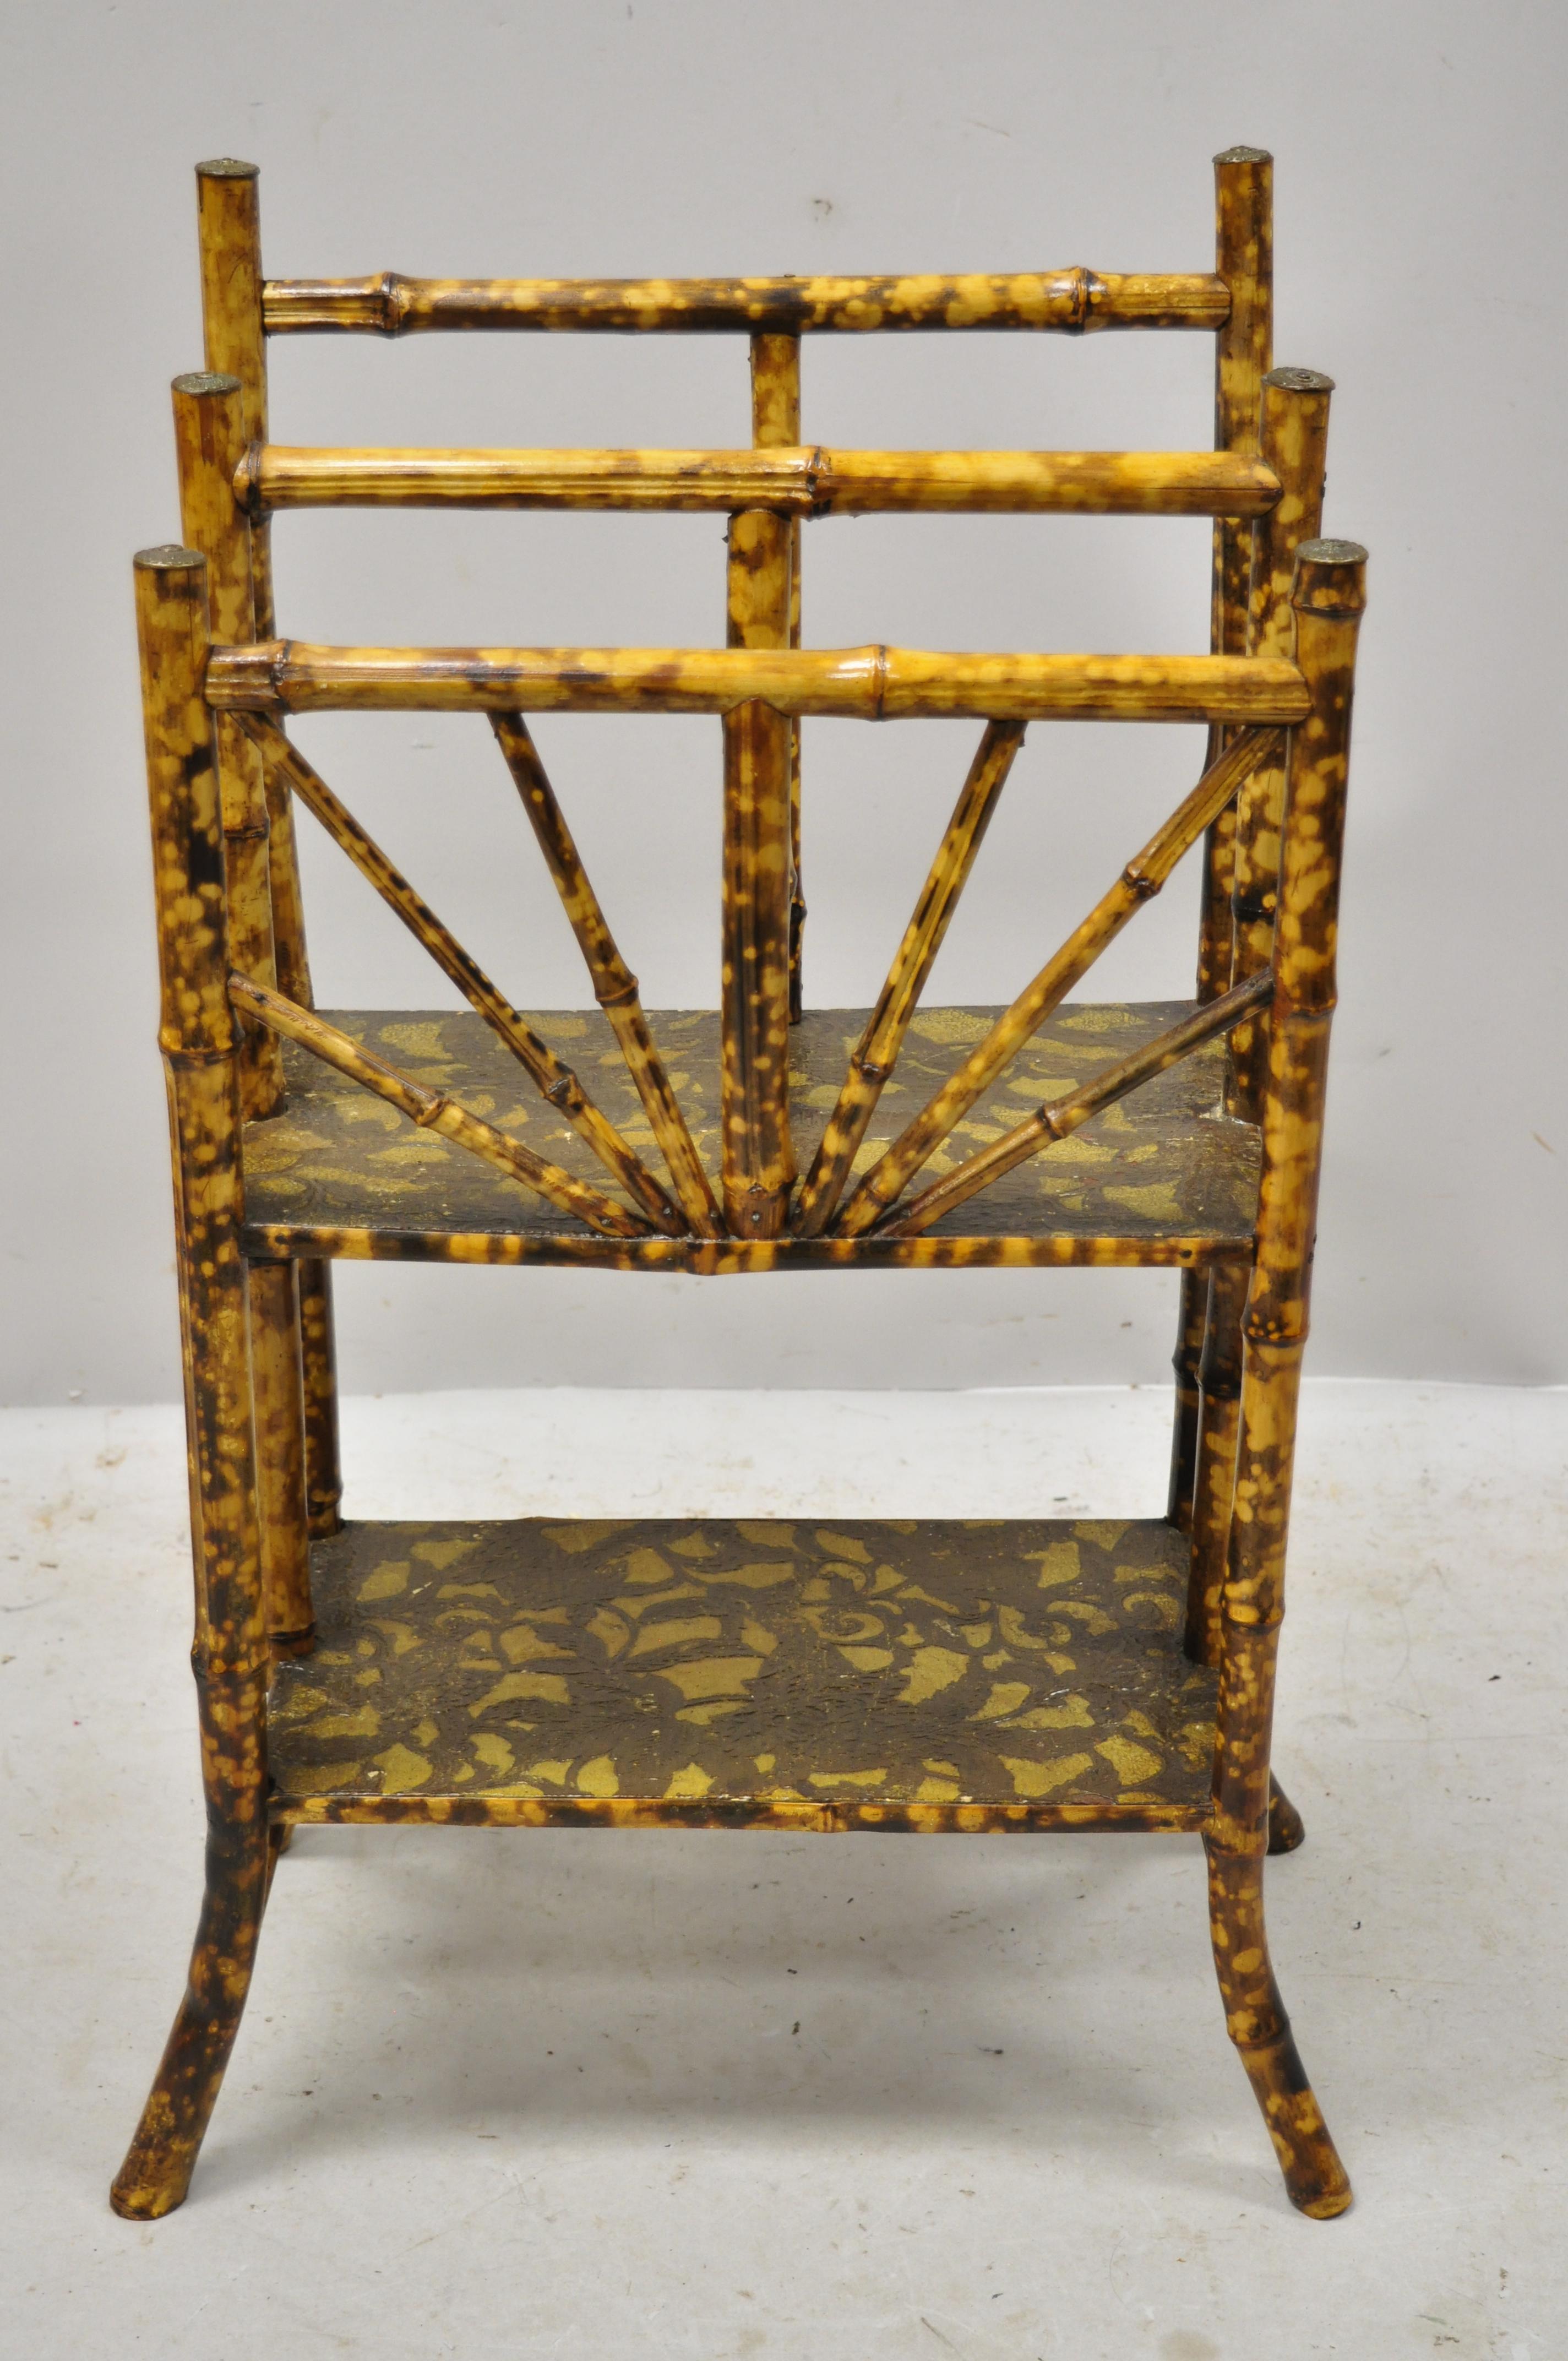 19th century English Victorian charred bamboo 2-tier magazine rack stand. Item features a lower shelf, charred finish, 2 magazine slots, solid bamboo construction, very nice antique item, circa late 19th century. Measurements: 32